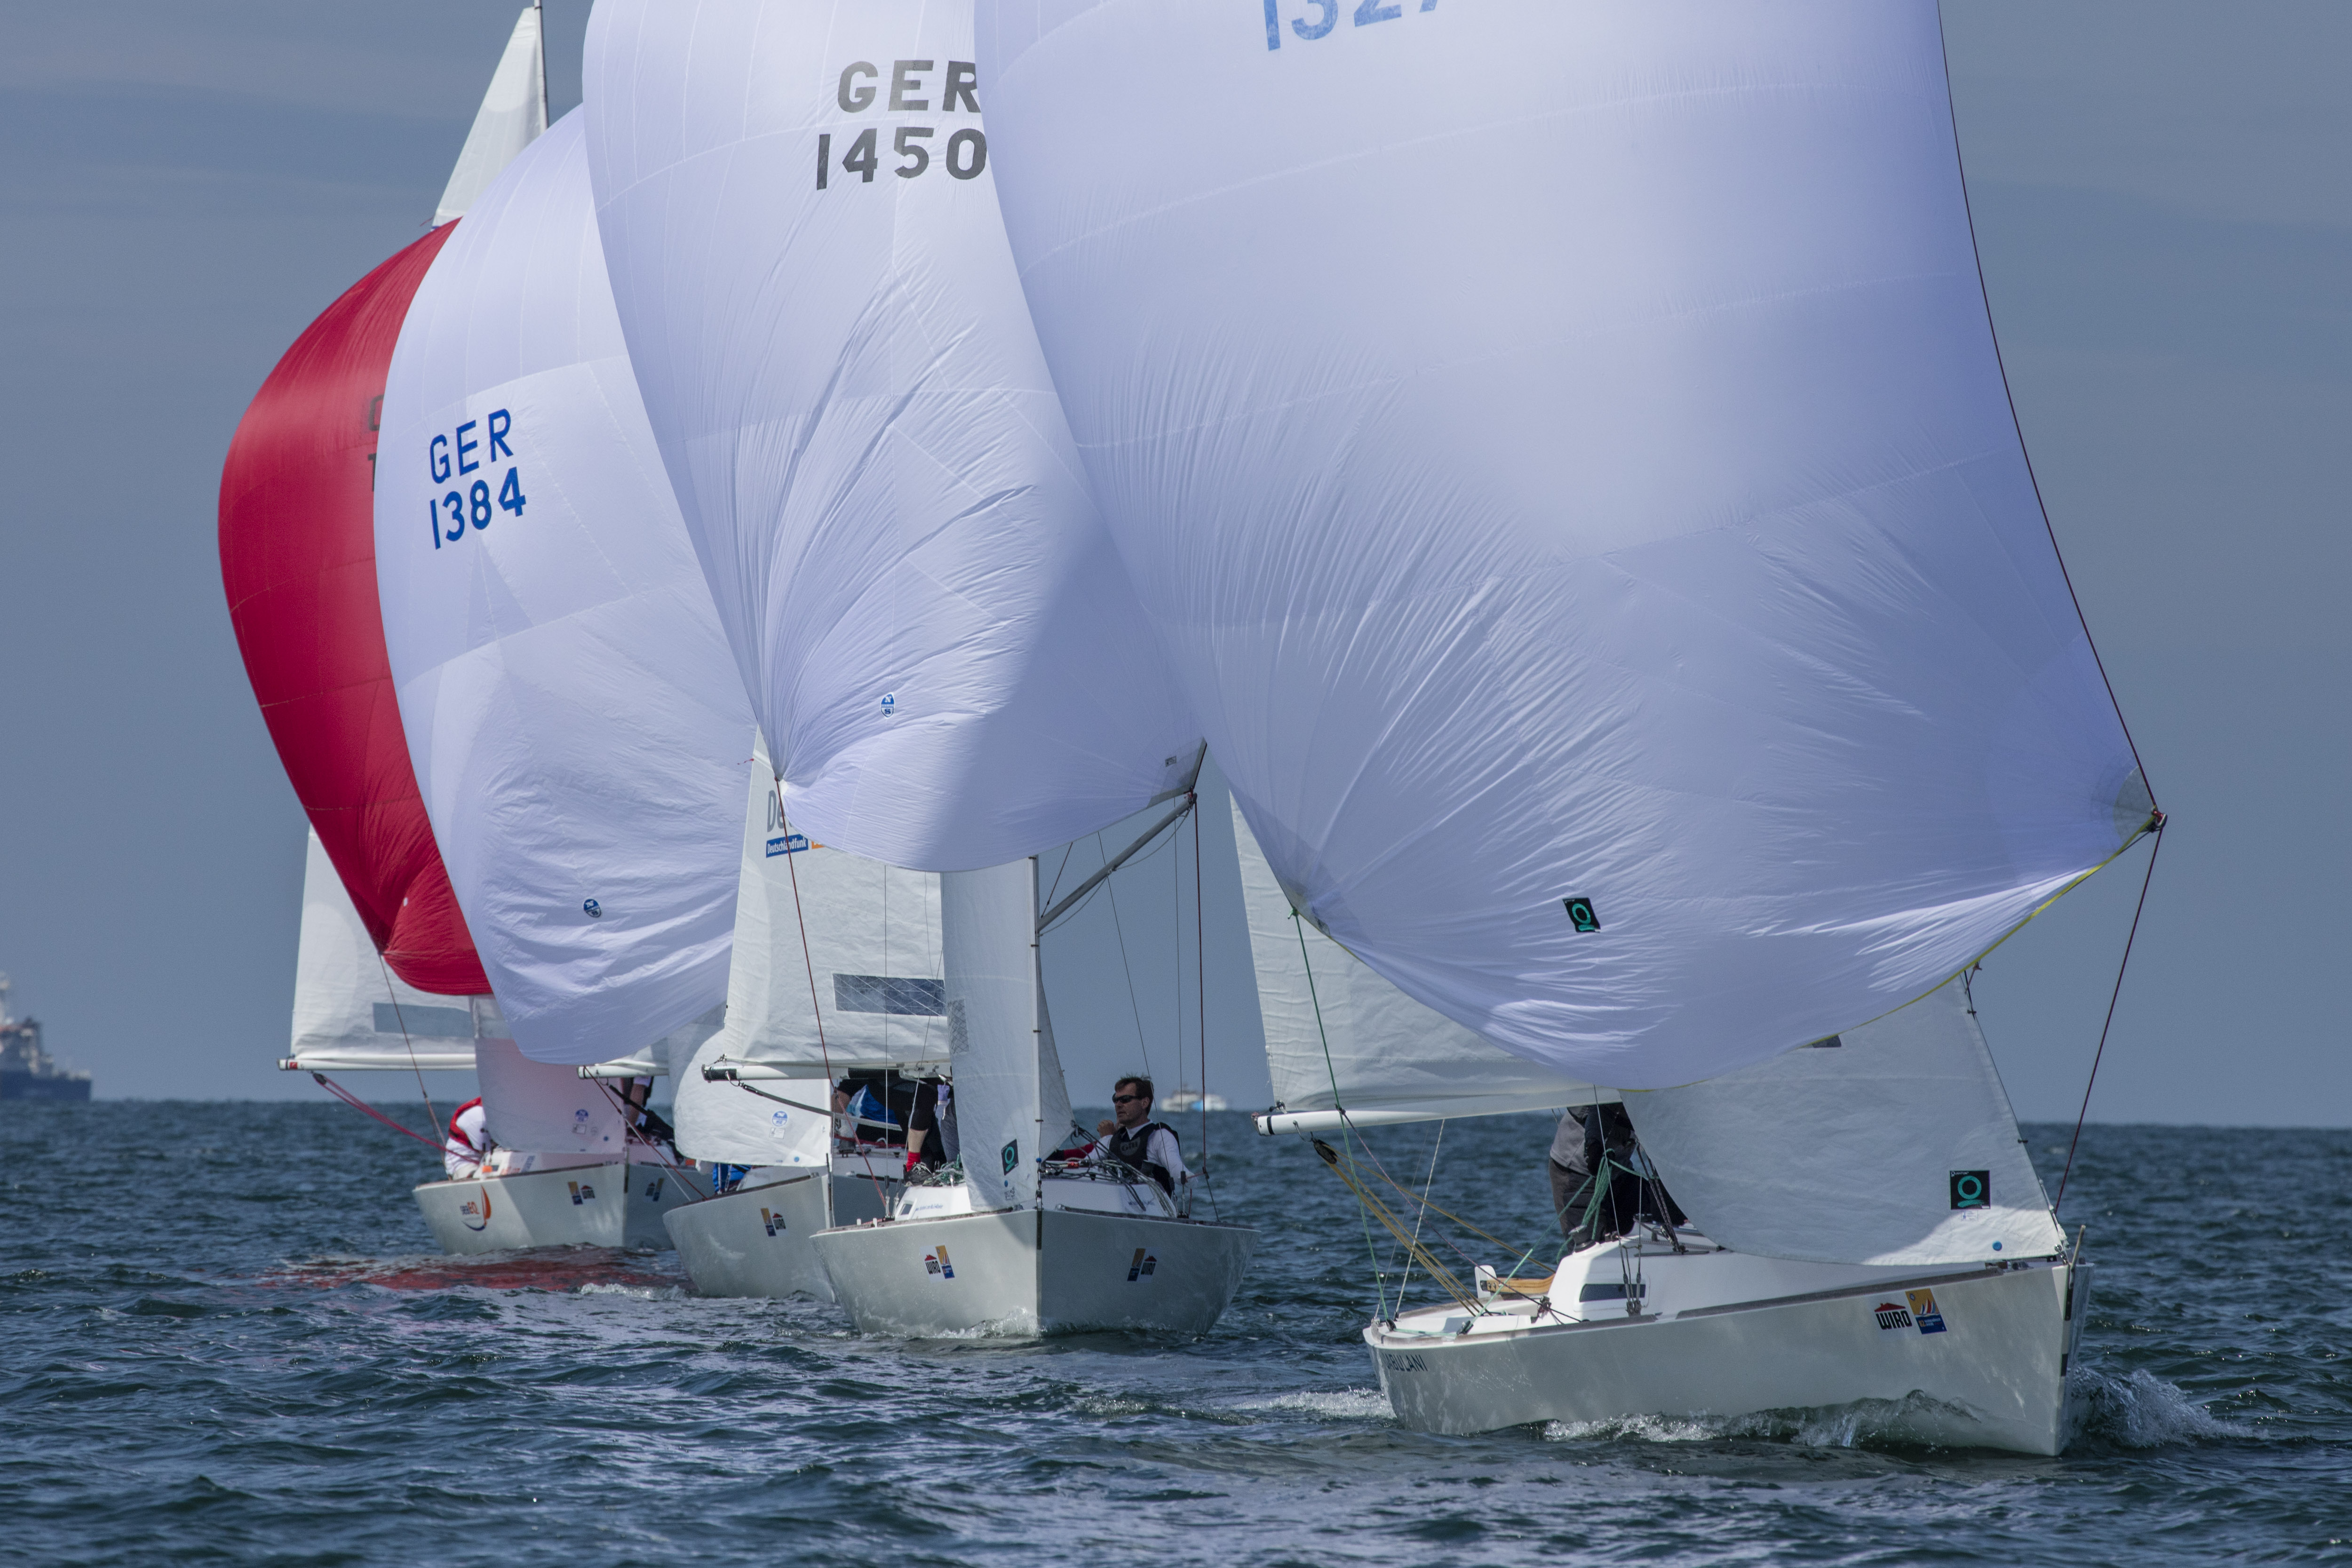  J/22  World Championship 2019  Warnemuende GER  Day 2, Lautier NED dominates, Koppernaes CAN stays on 3rd after seven races